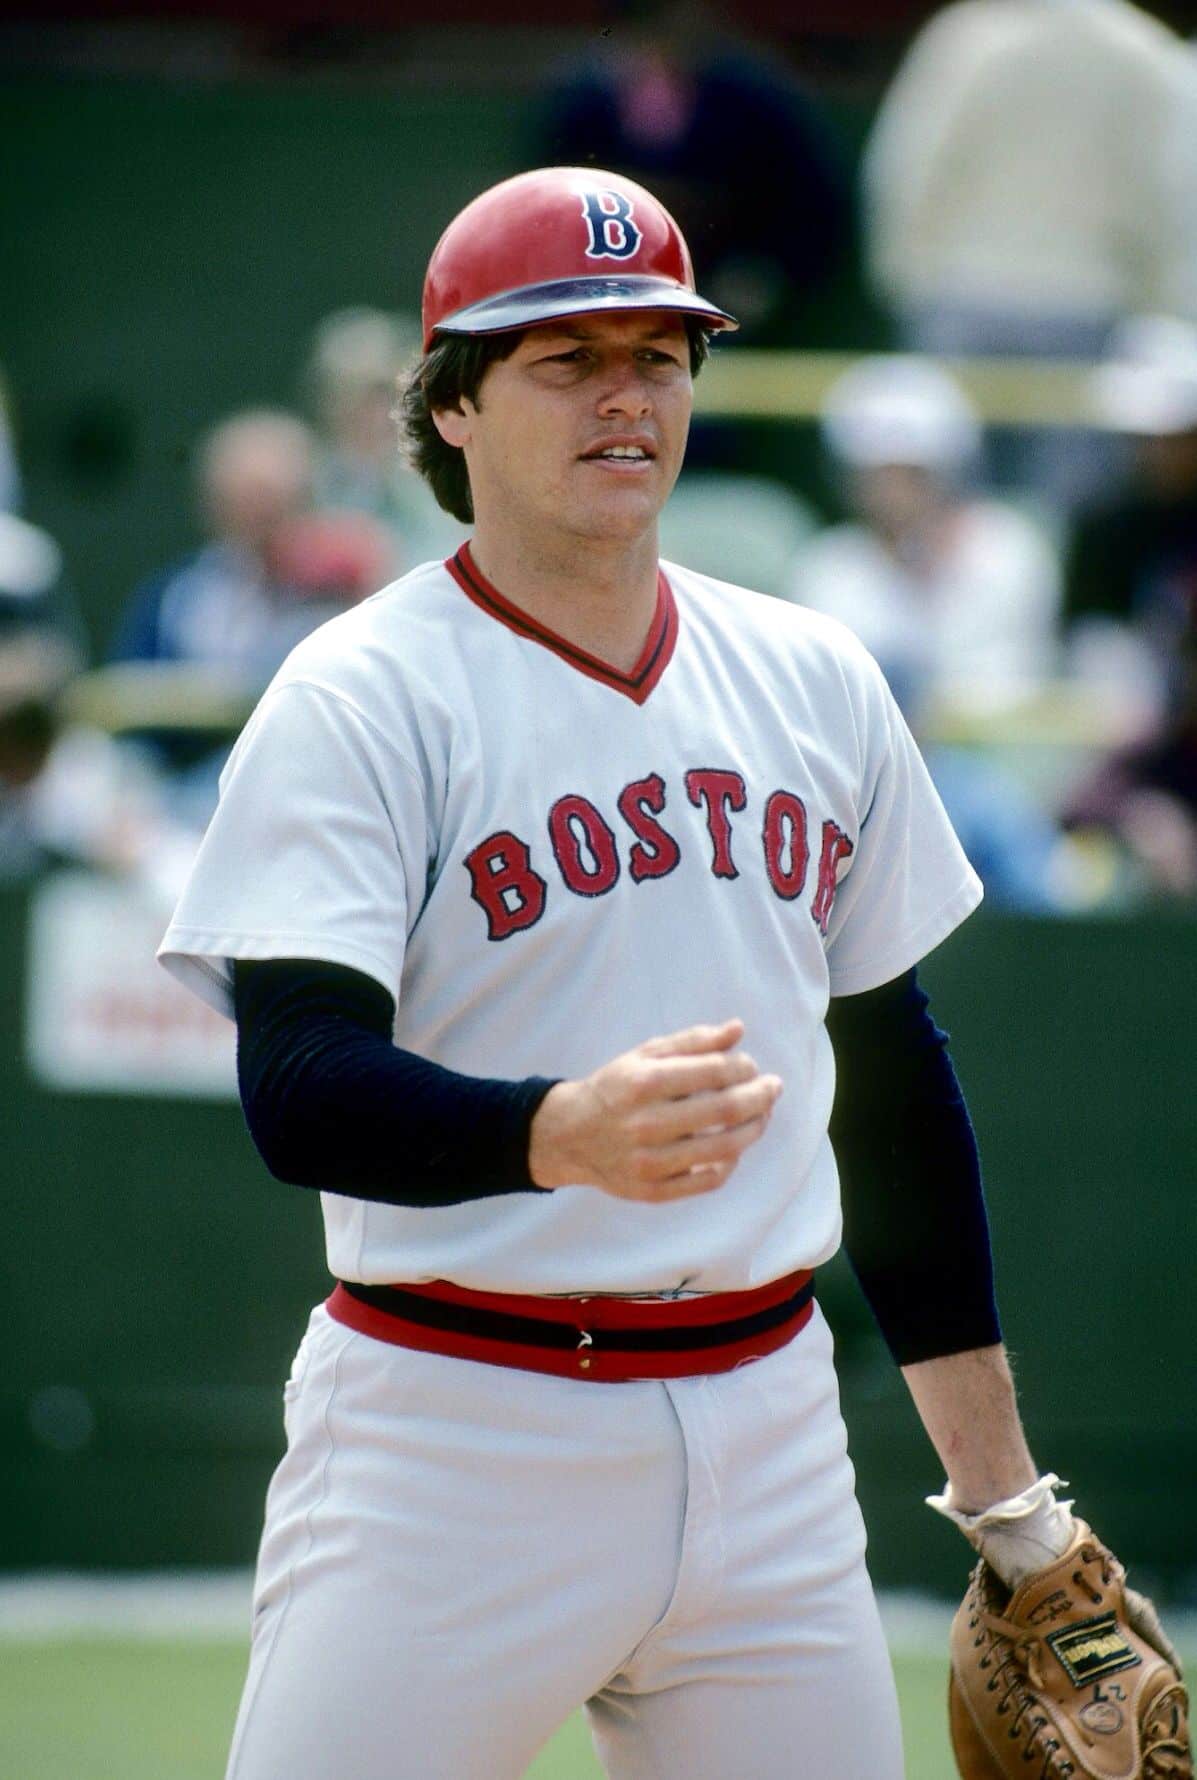 hall of fame catcher carlton fisk while with the boston red sox